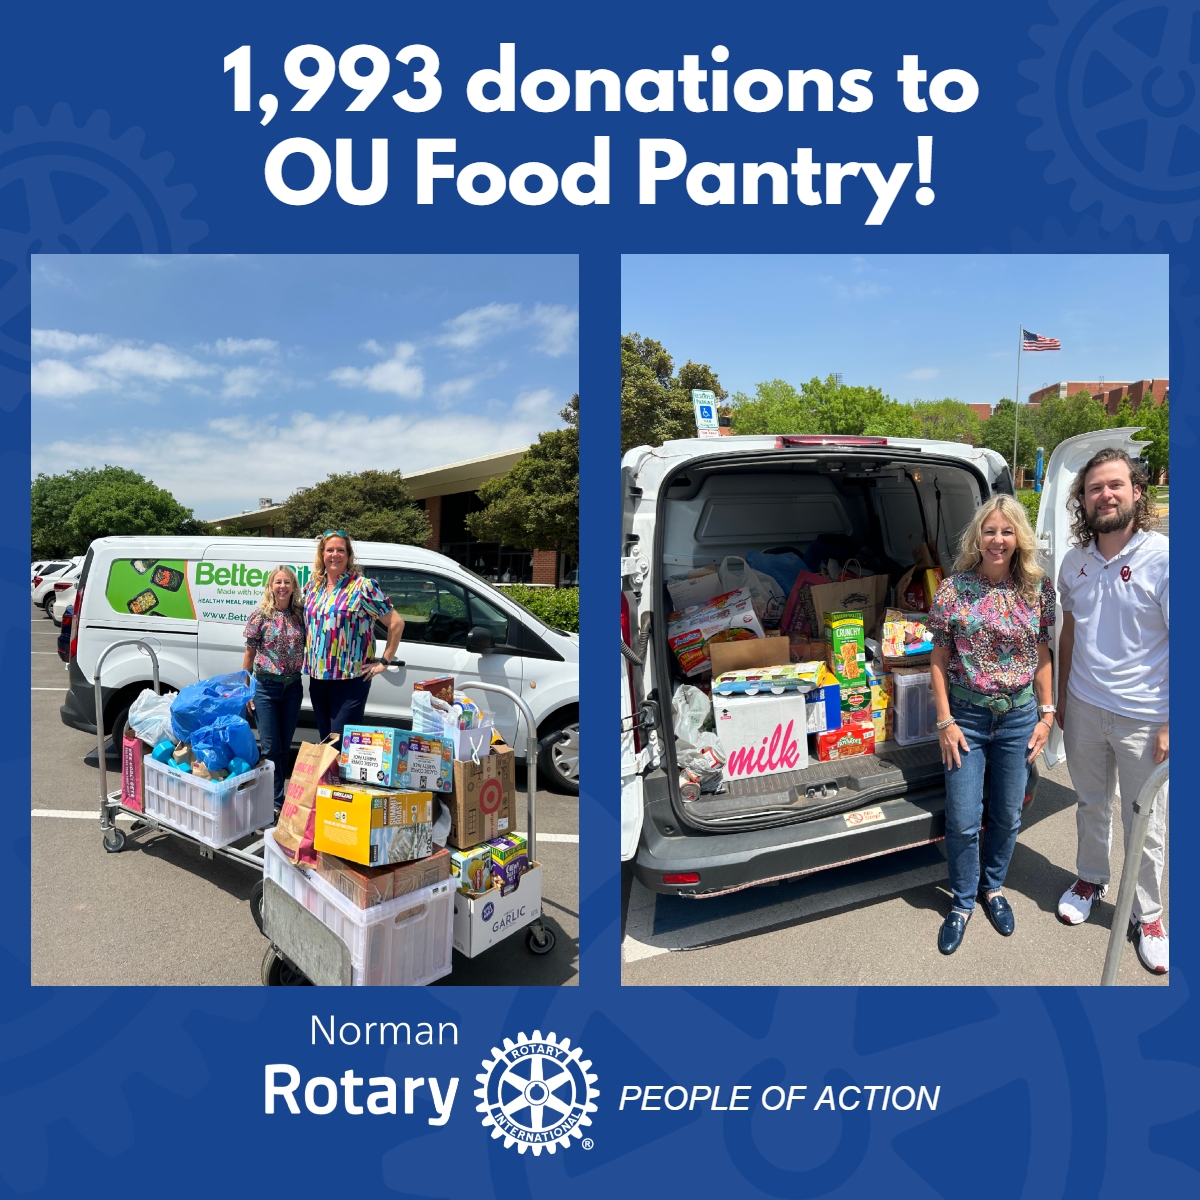 1,993 donations by #Rotary to the @OUFoodPantry!! 

Waiting to hear how OU faired in the SEC Challenge but regardless, way to show Norman Rotarians are #PeopleOfAction!!